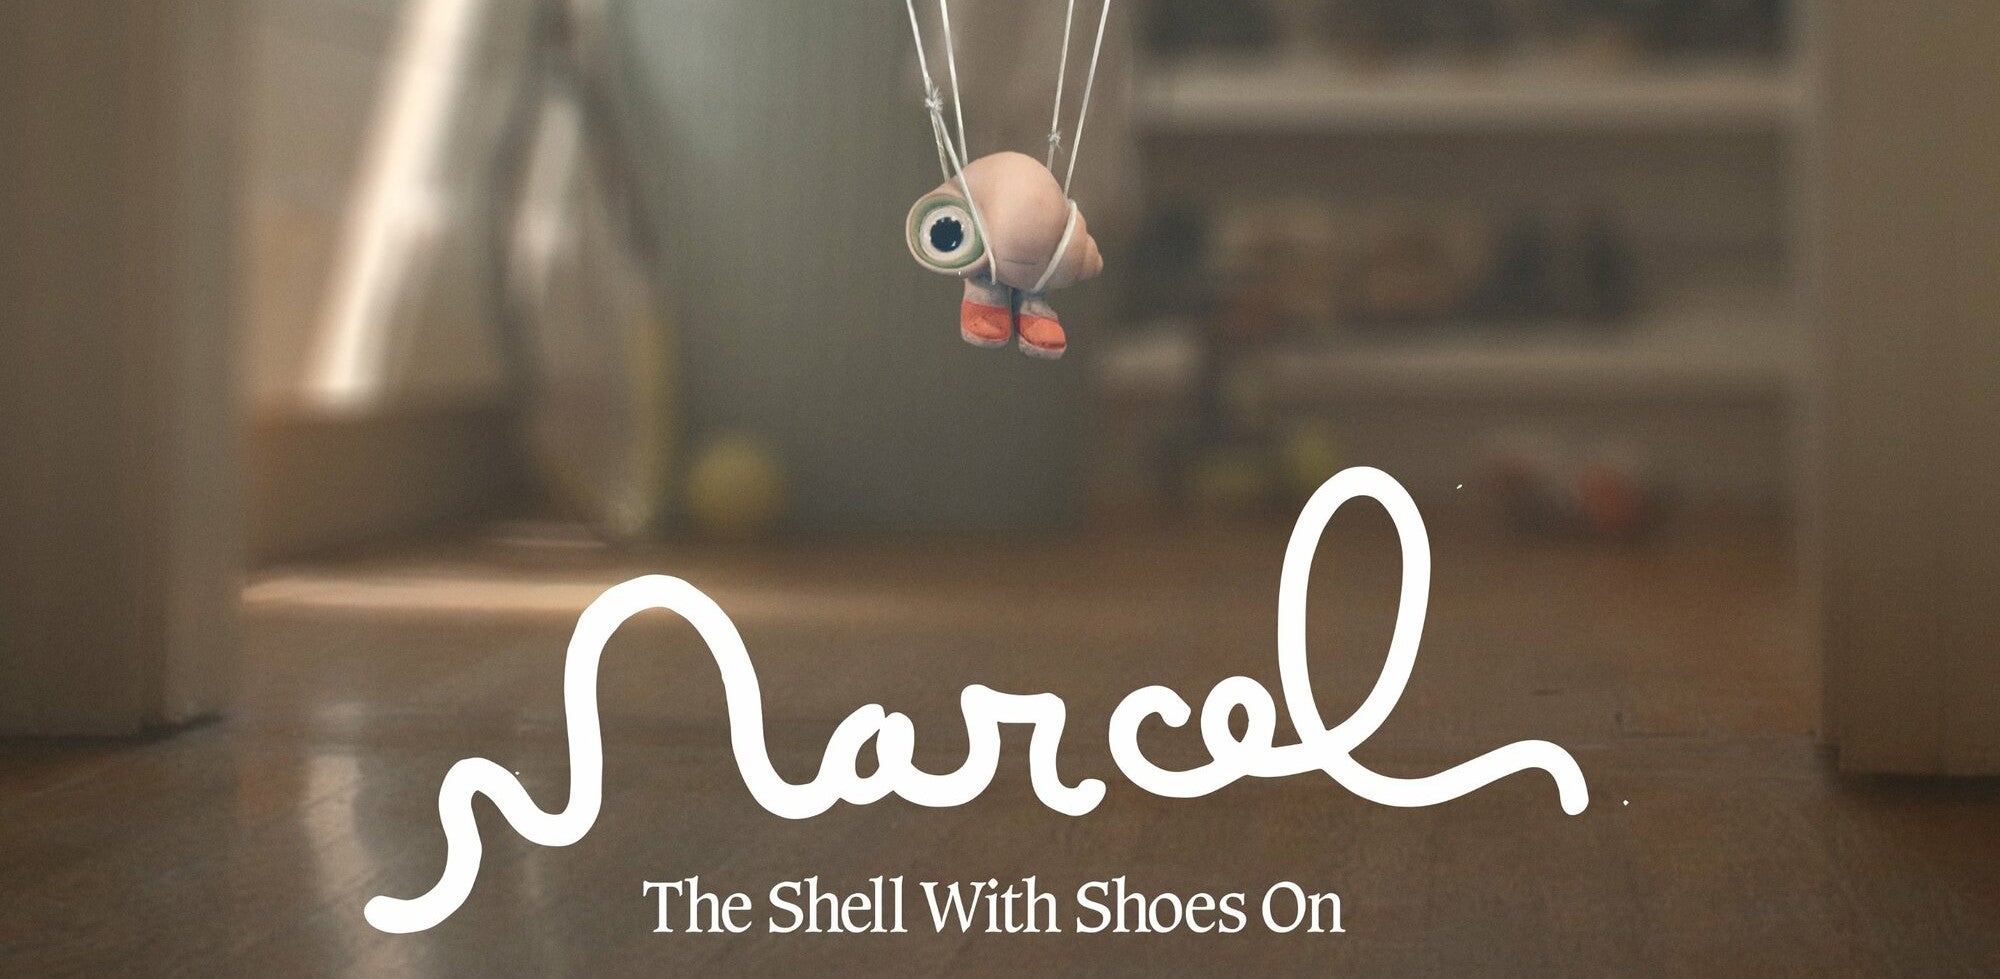 Cropped Marcel The Shell With Shoes On poster featuring Marcel